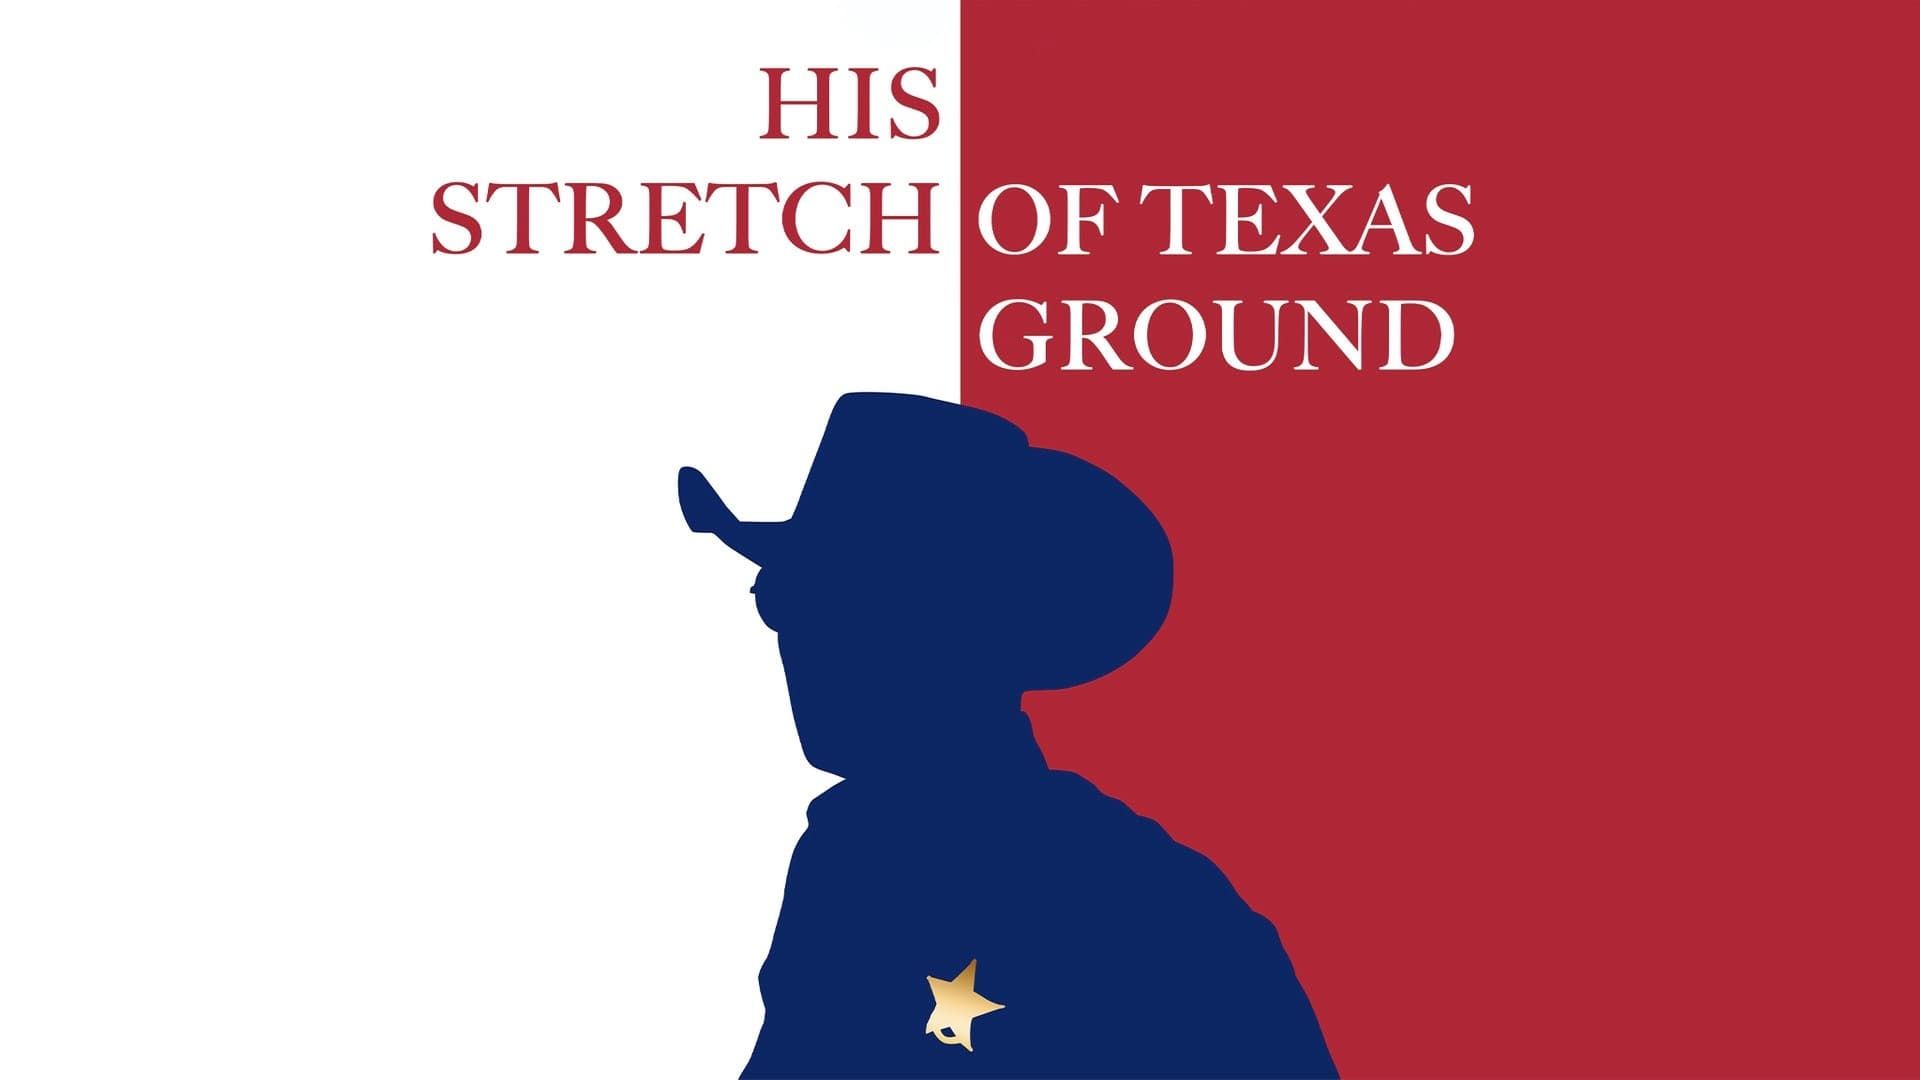 His Stretch of Texas Ground background